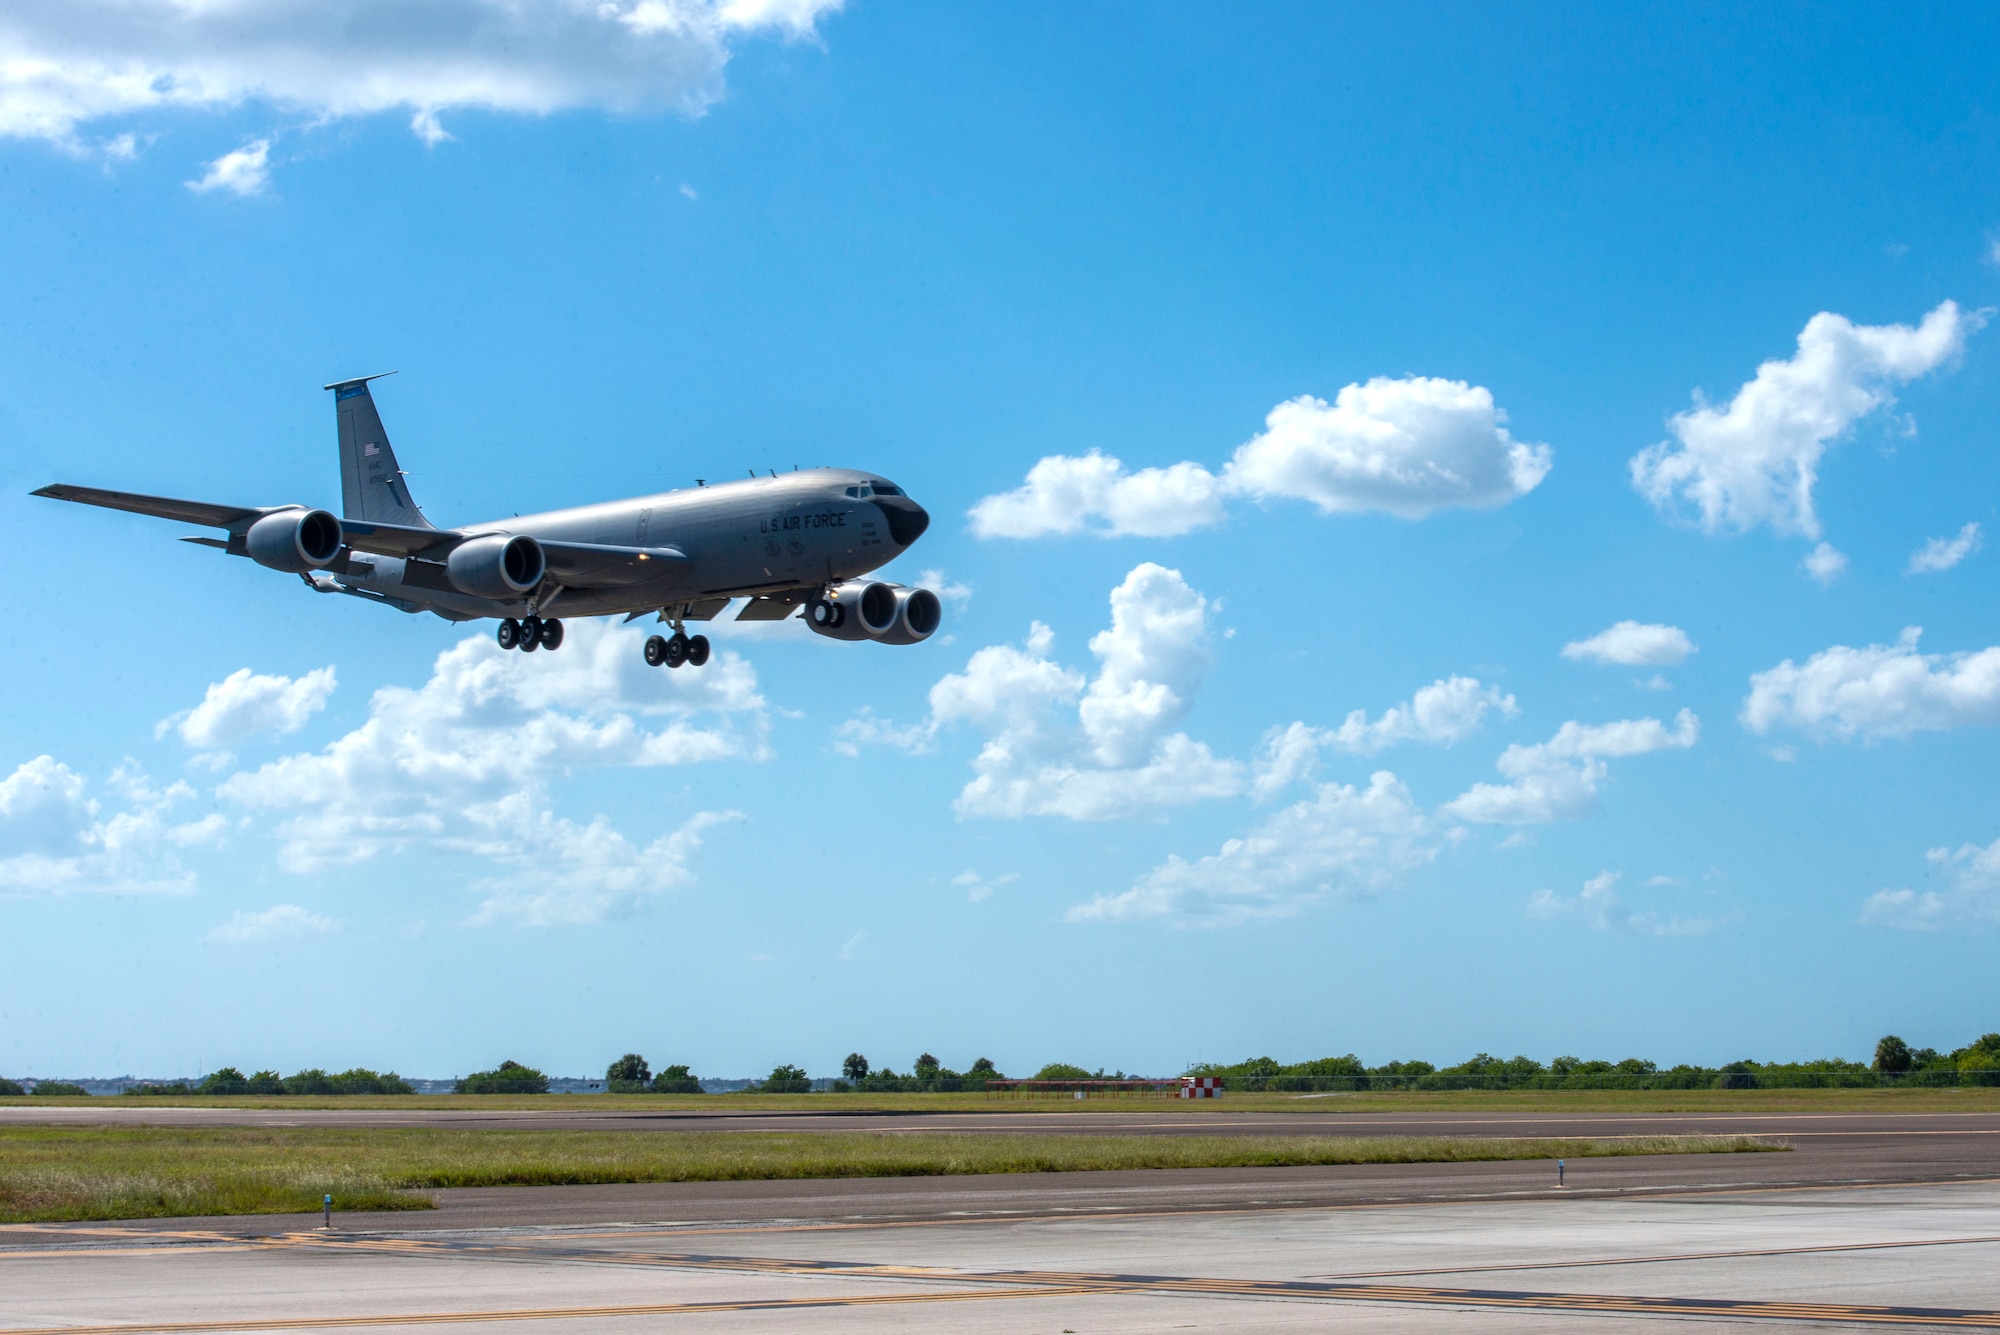 A 50th Air Refueling Squadron KC-135 Stratotanker aircraft returns home at MacDill Air Force Base, Florida, Oct. 18, 2020, from a two-month deployment at Al Udeid Air Base, Qatar.